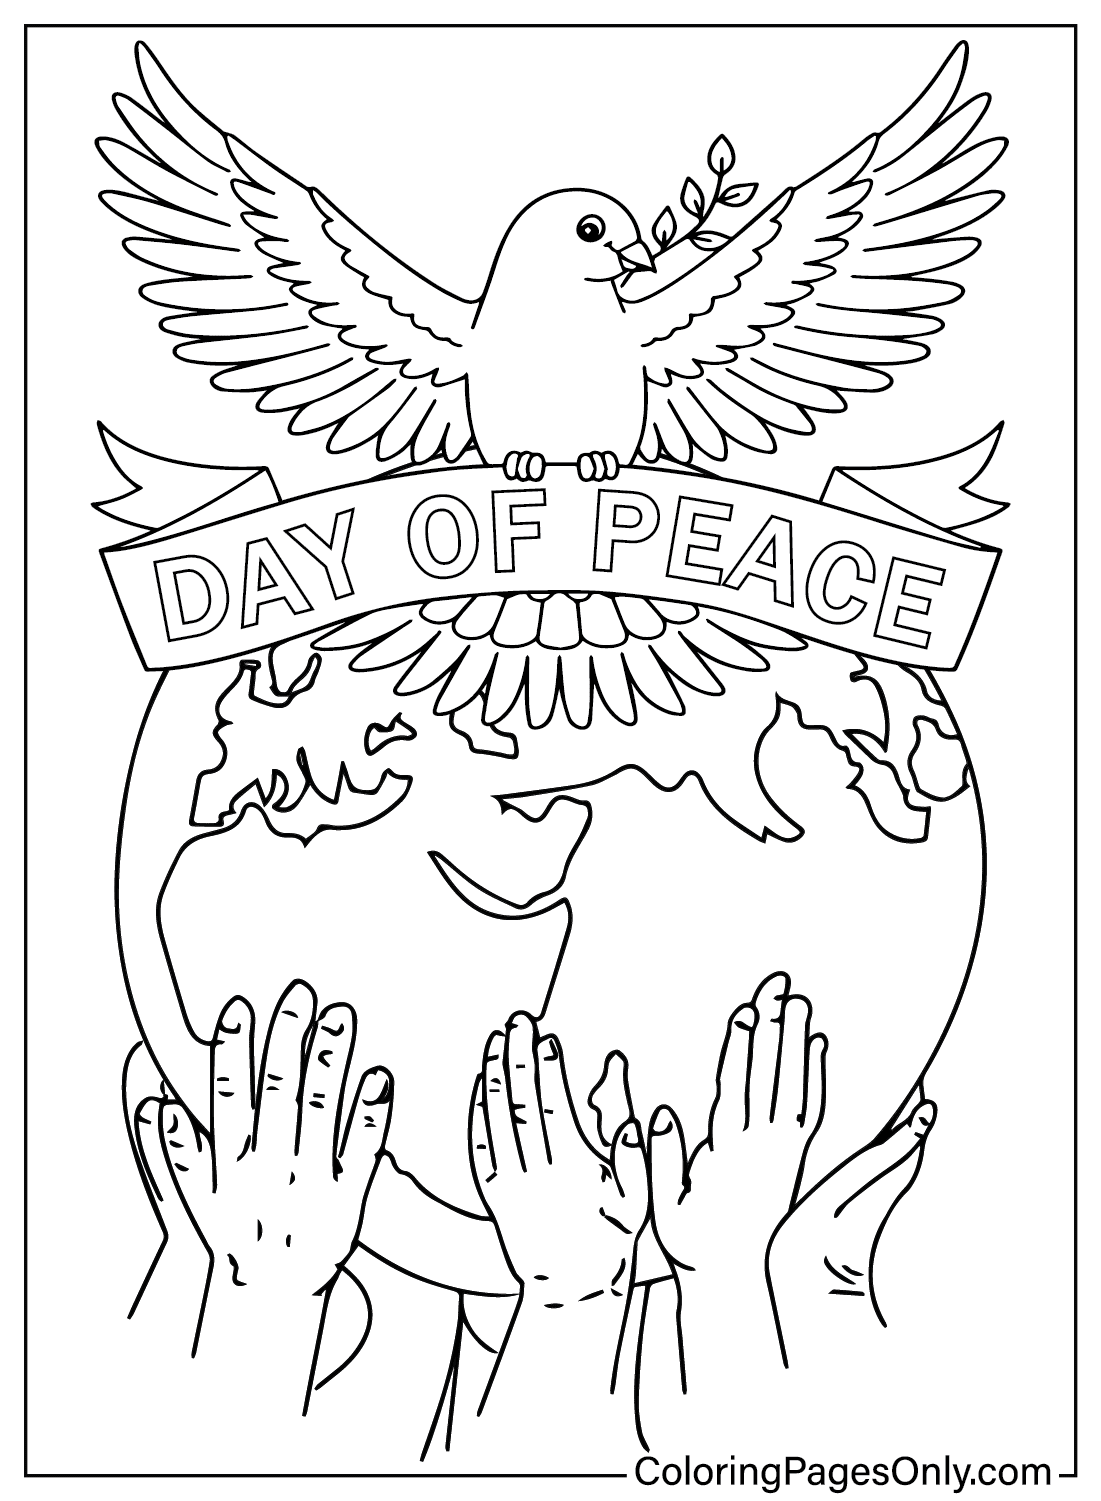 Coloring Page Day of Peace